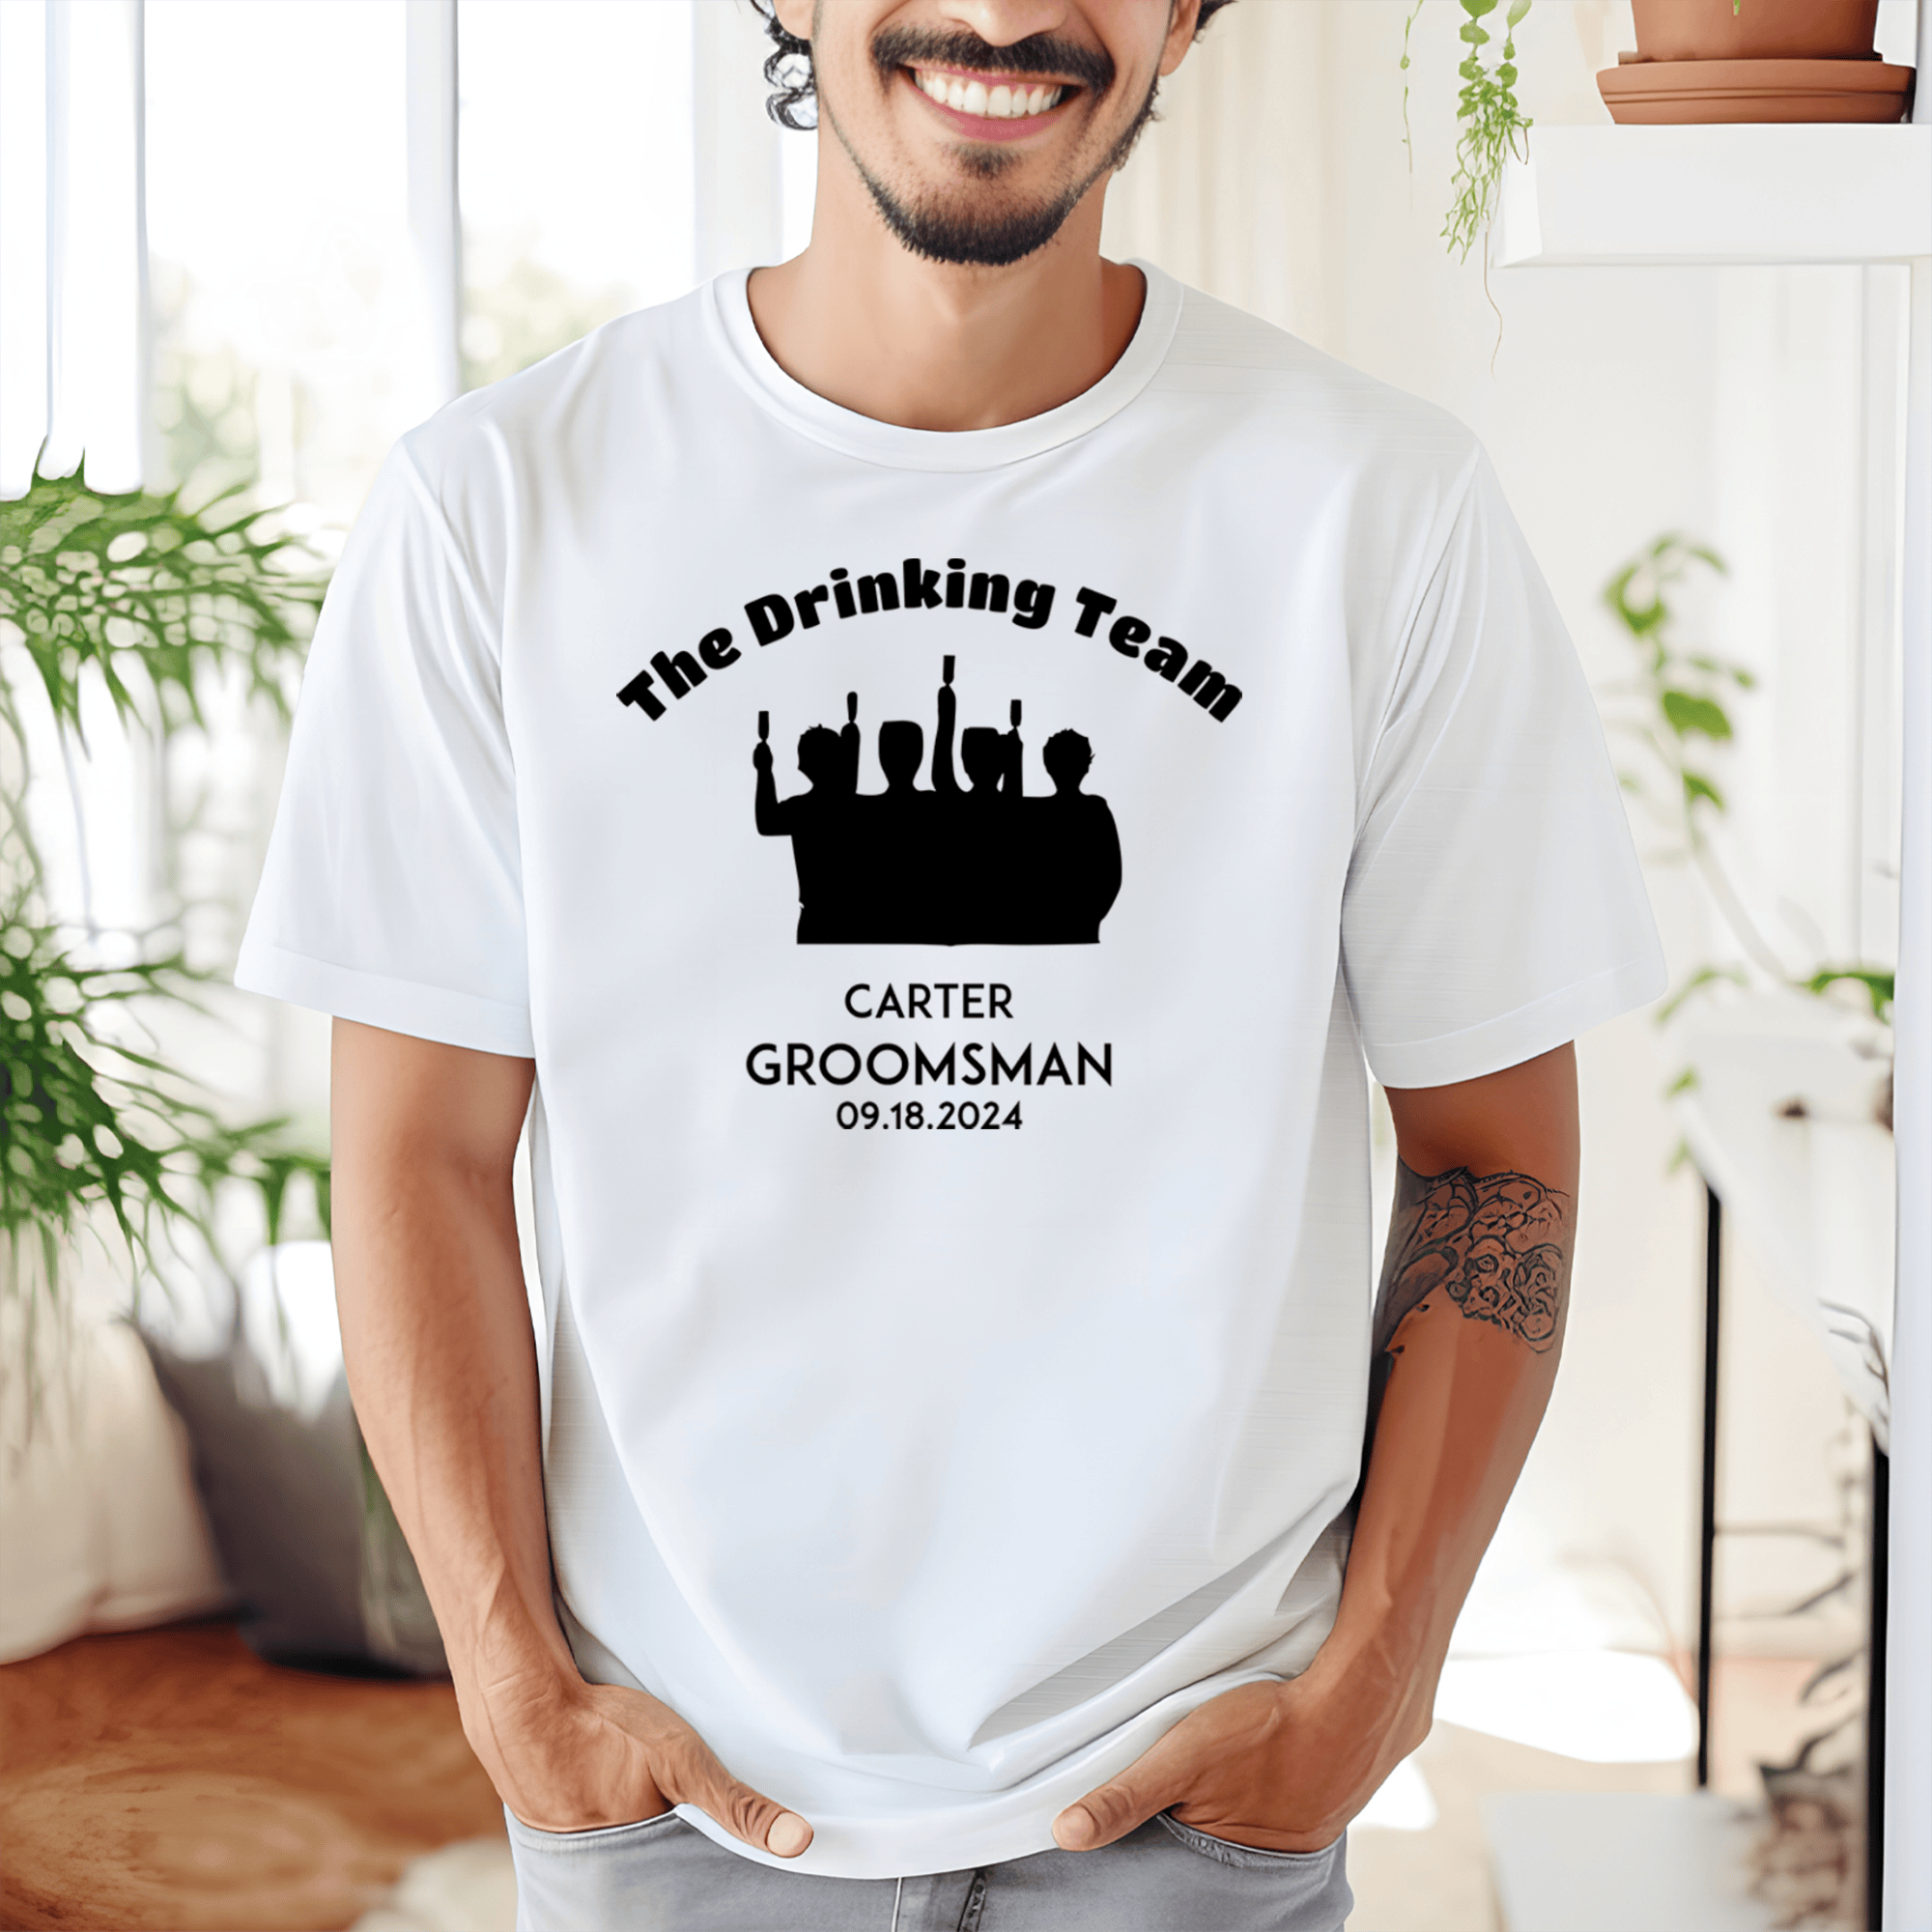 White Mens T-Shirt With The Drinking Team Design